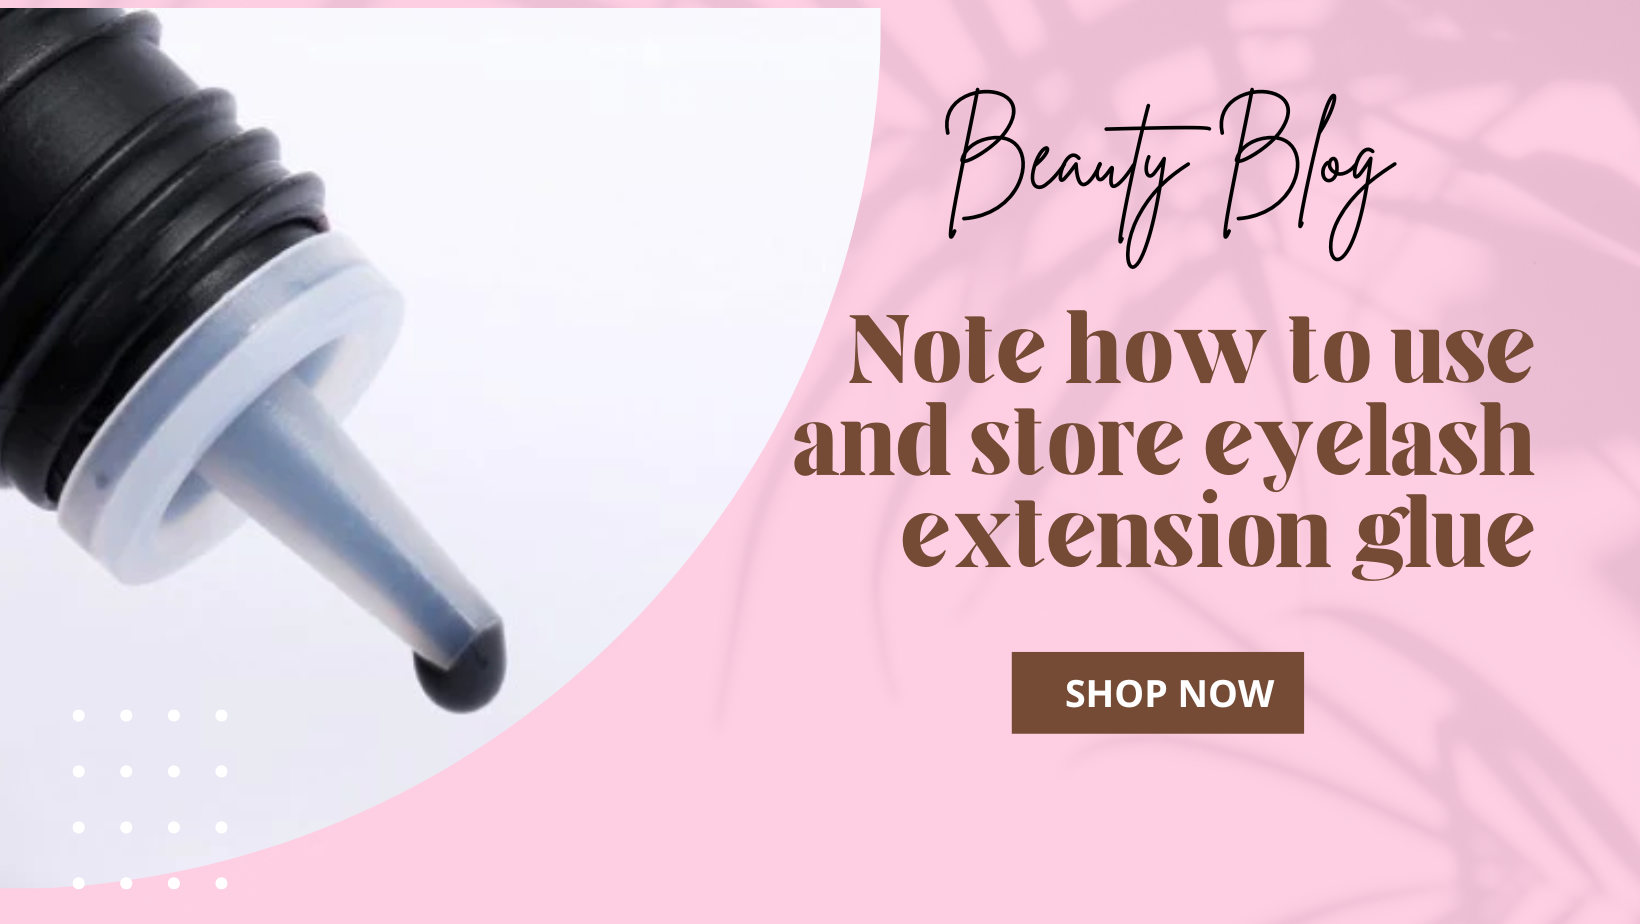 Note how to use and store eyelash extension glue